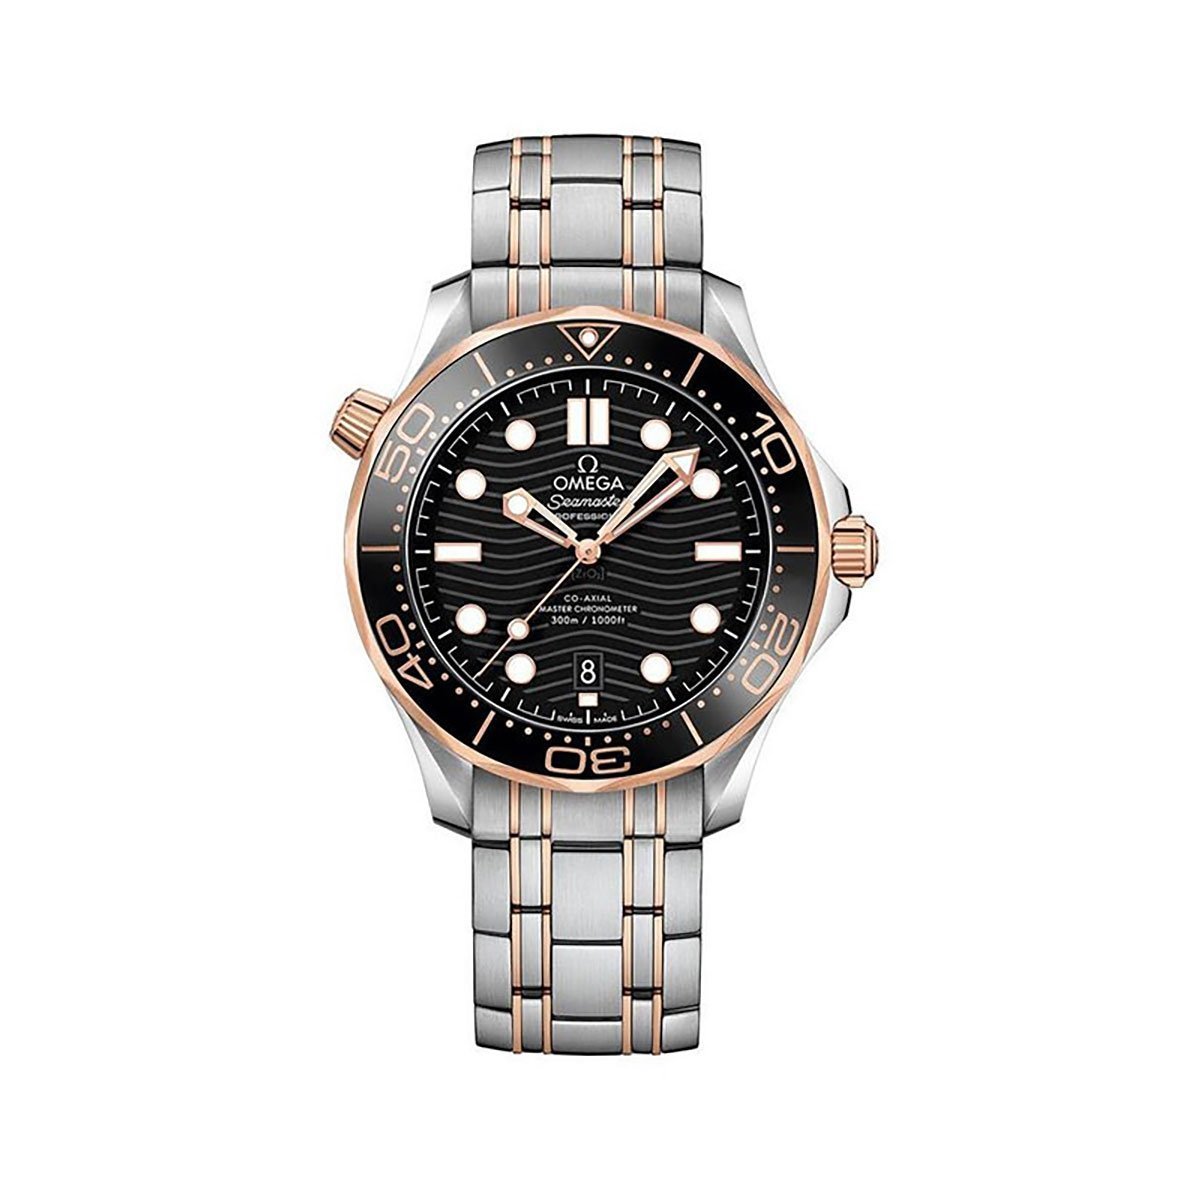 Seamaster Diver 300M Co-Axial Master Chronometer 42mm Watch